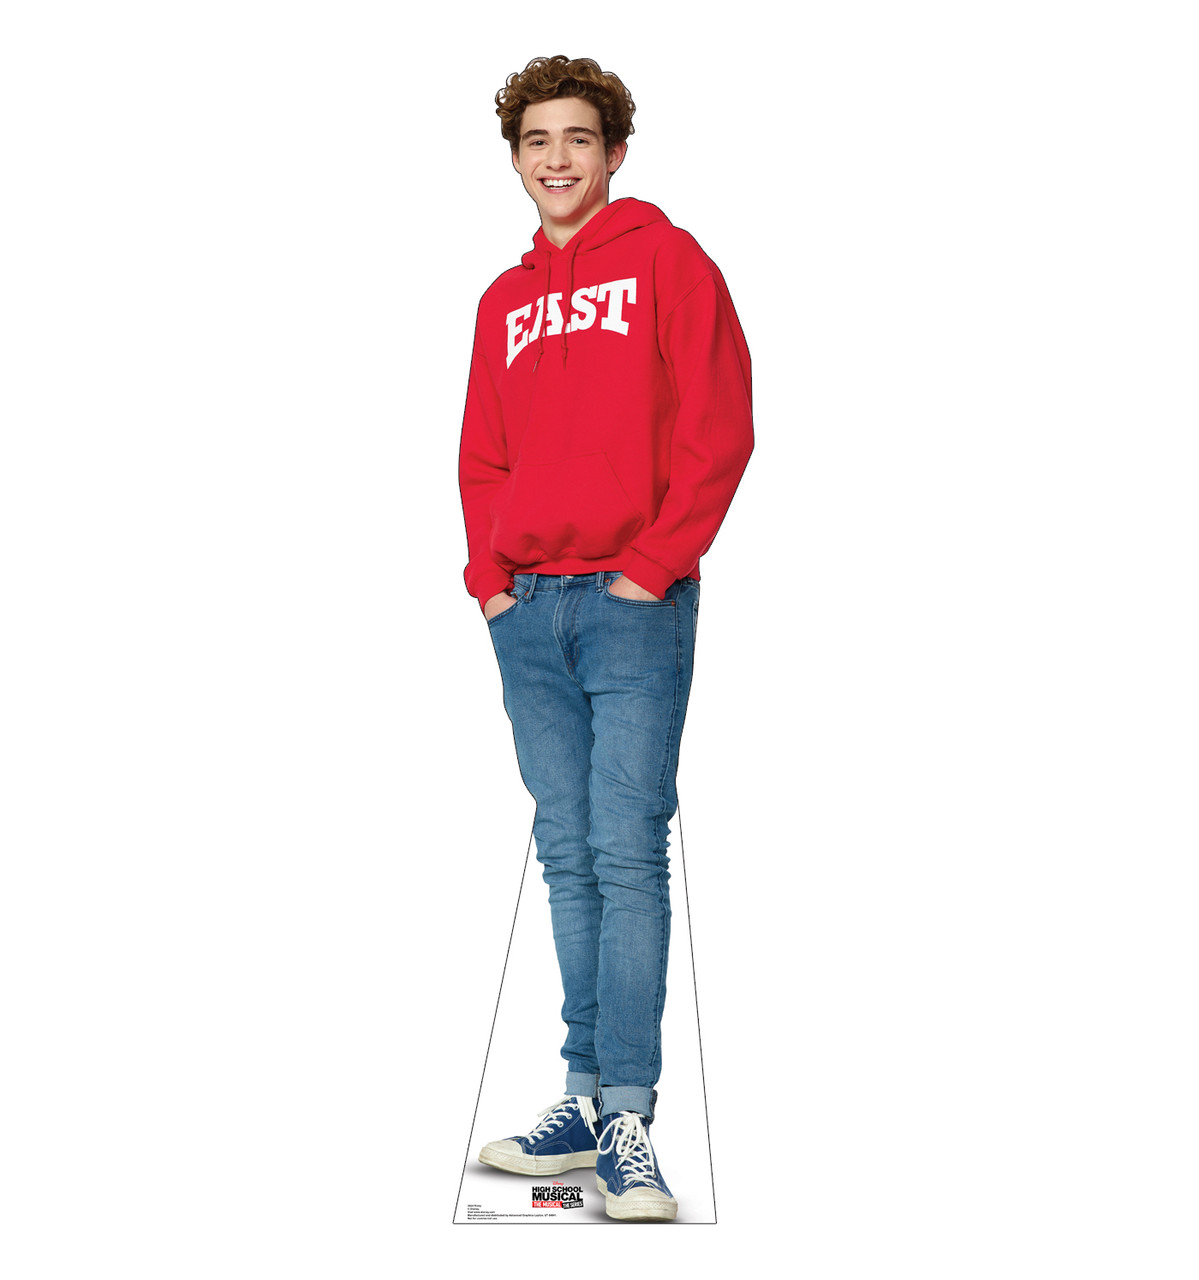 Life-size cardboard standee of Ricky from Disney + High School Musical The Series.